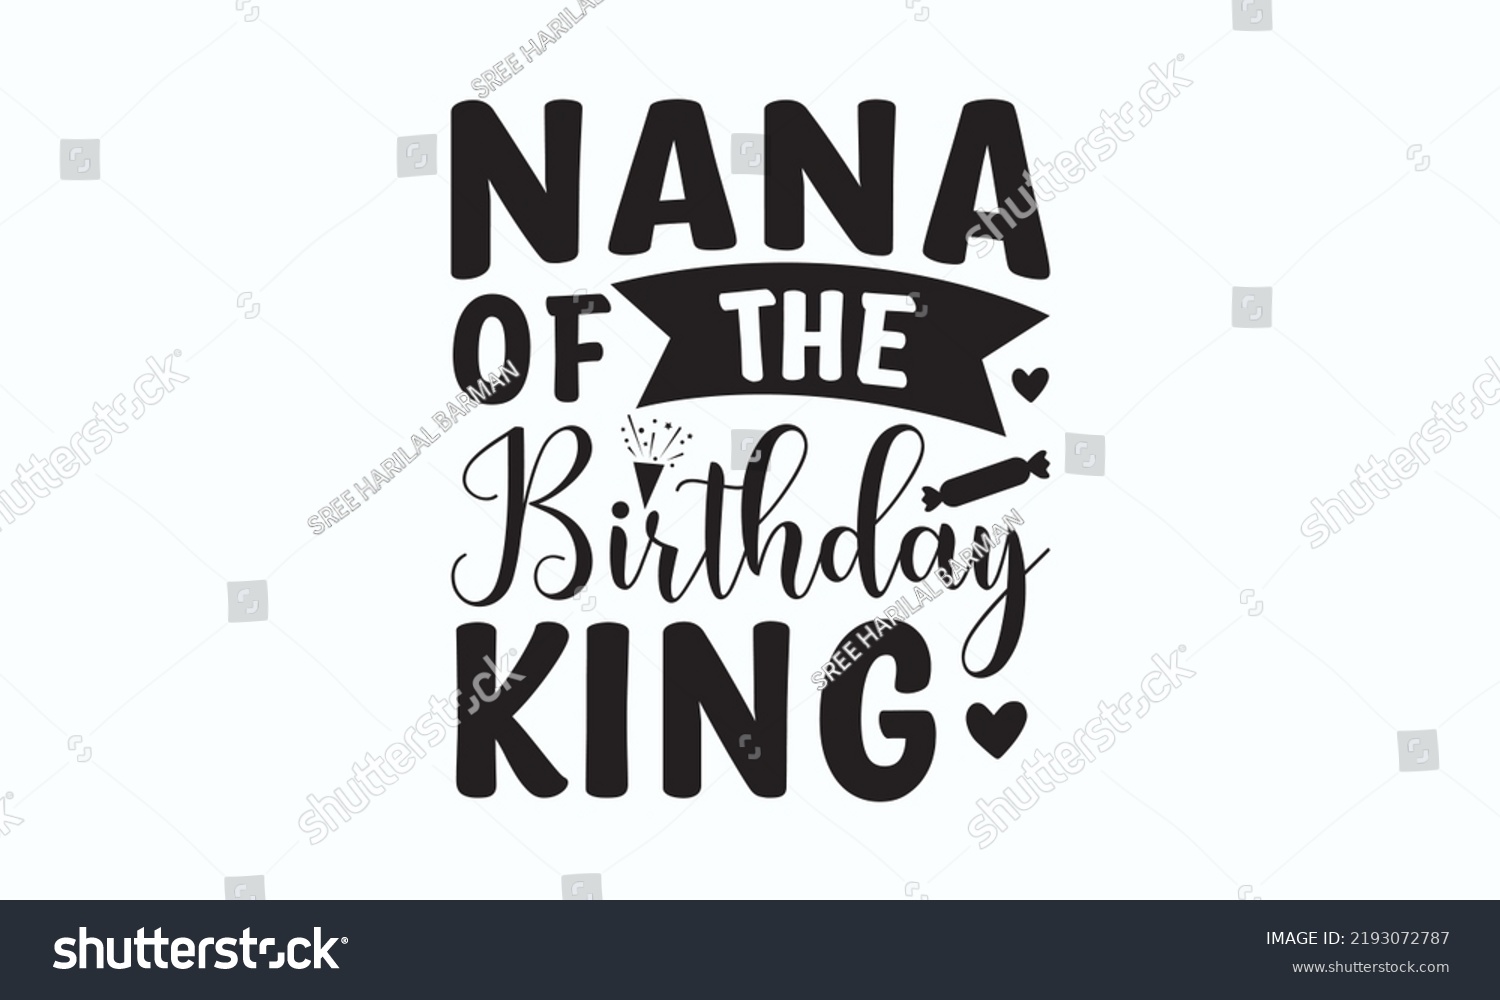 SVG of Nana of the birthday king - Birthday SVG Digest typographic vector design for greeting cards, Birthday cards, Good for scrapbooking, posters, templet, textiles, gifts, and wedding sets. Vector Eps 10. svg